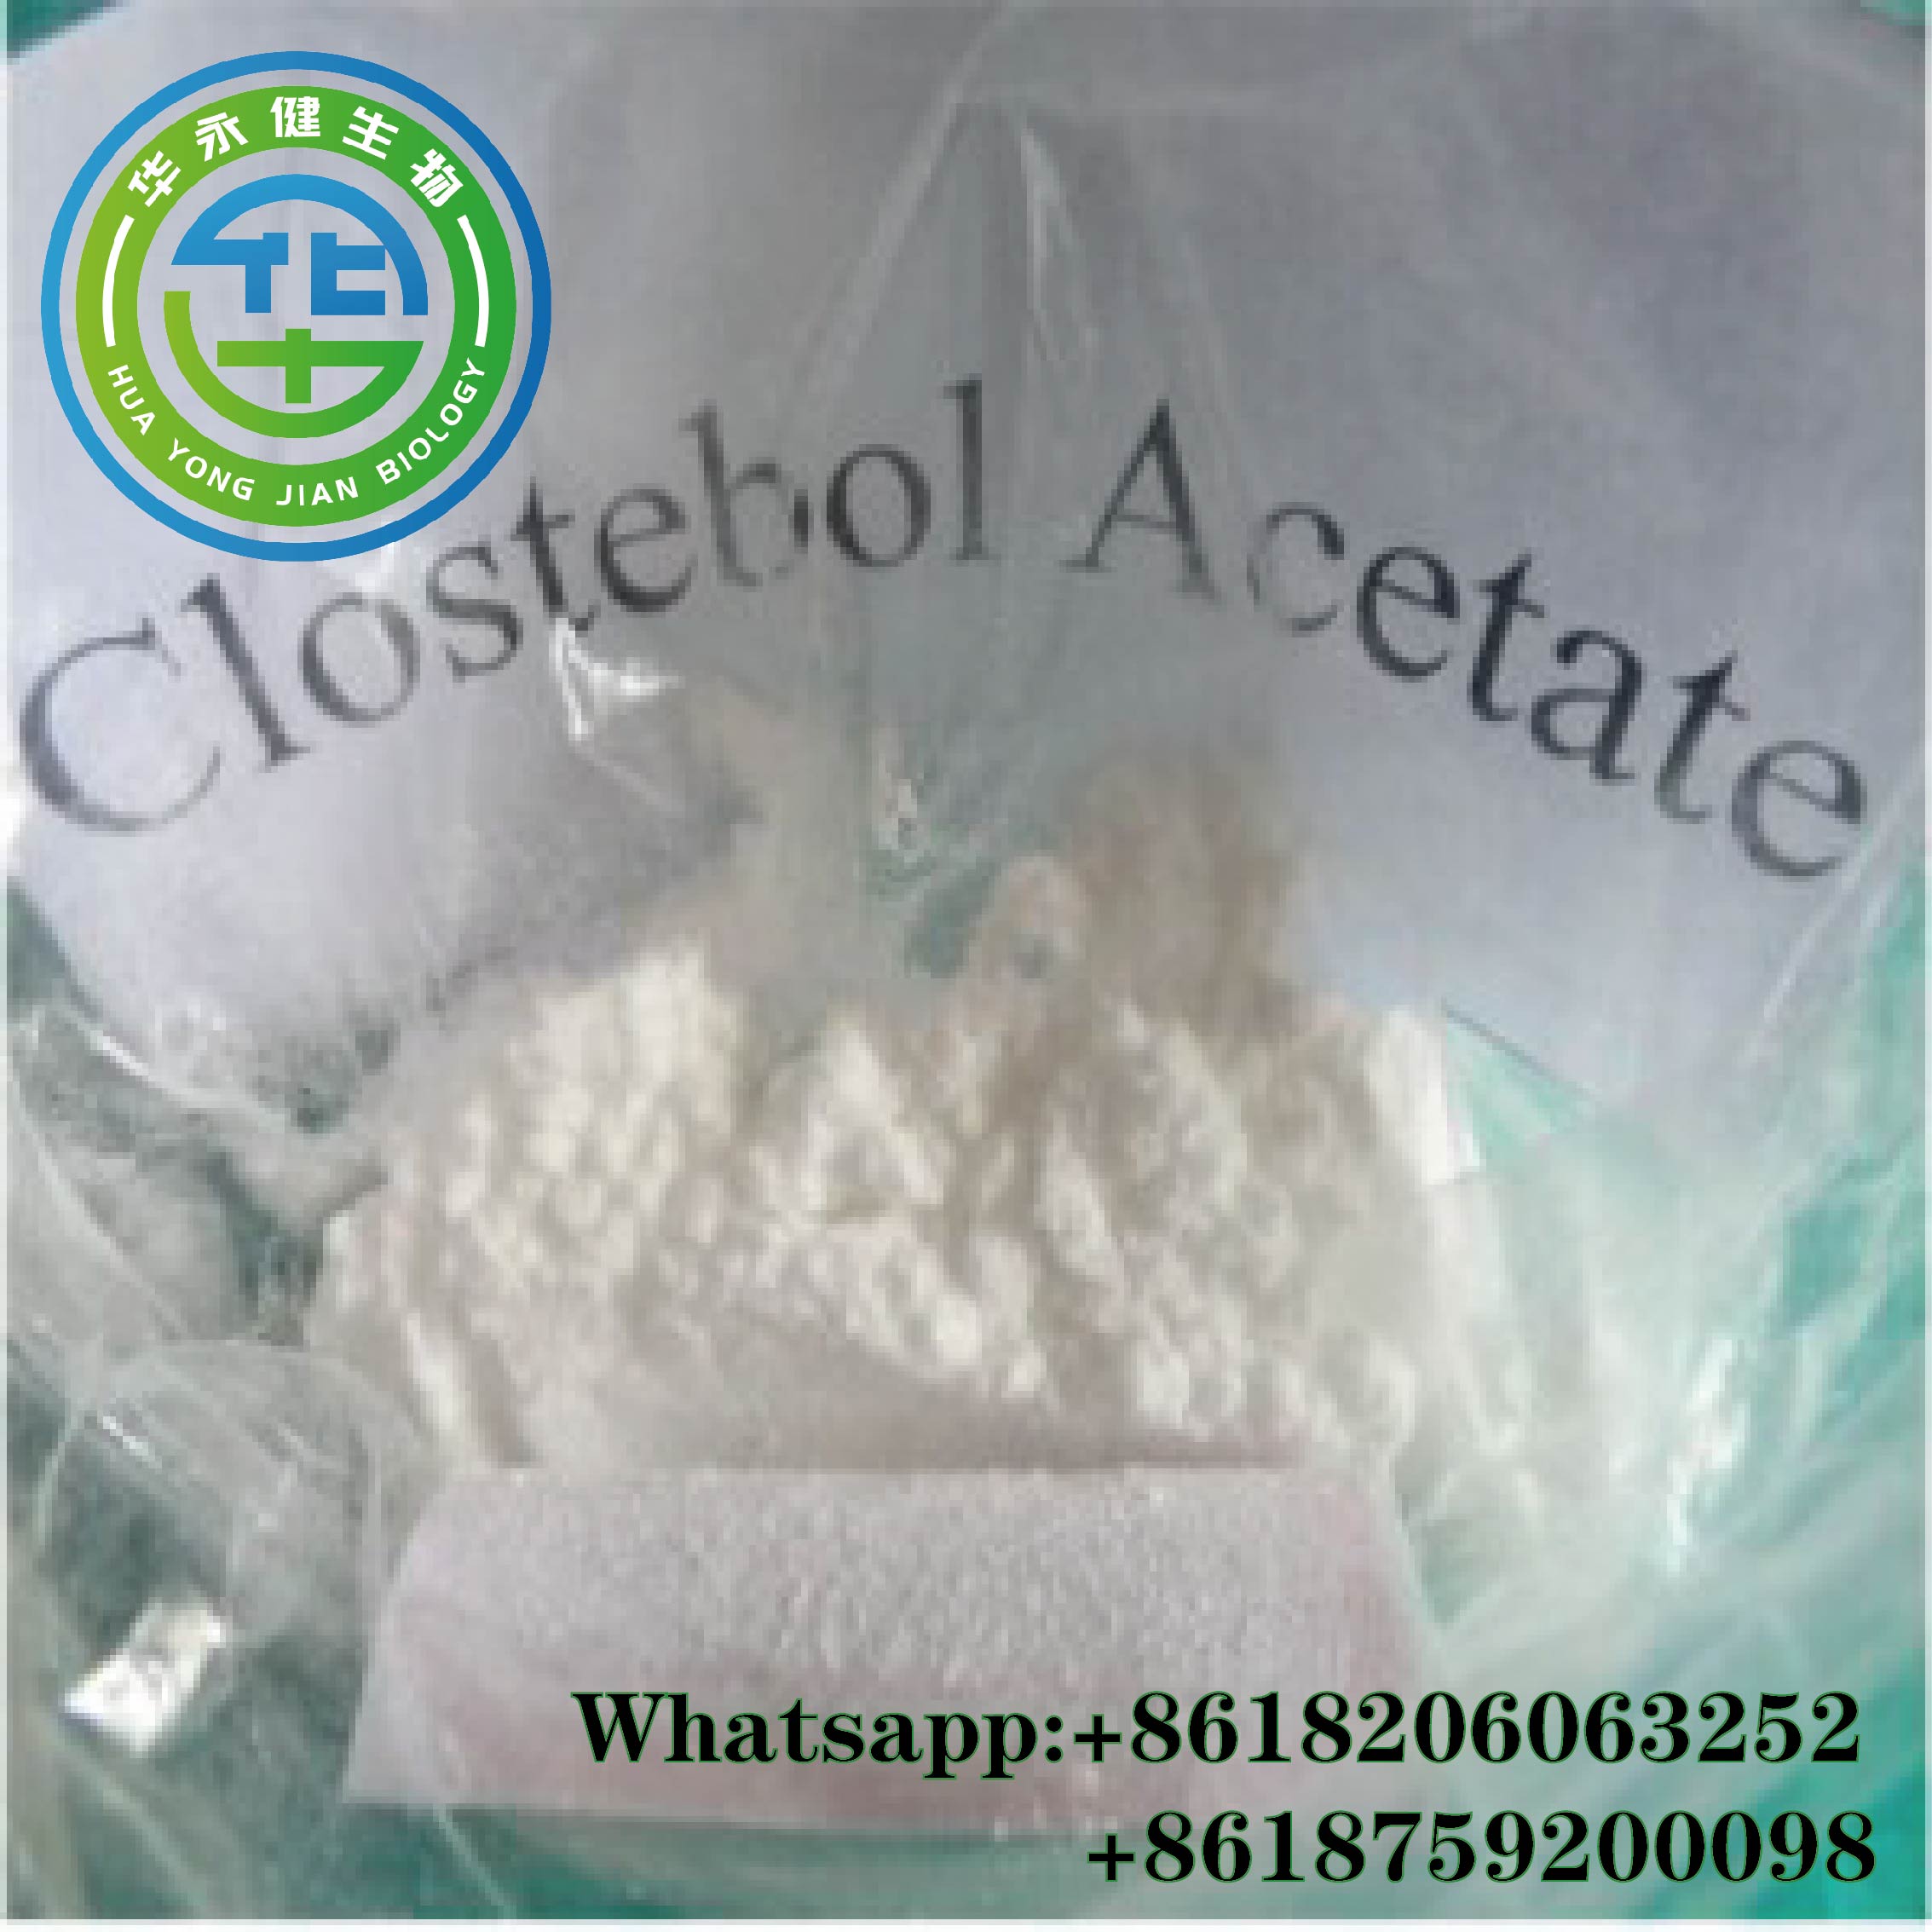 Real Steroids Clostebol Acetate Powder for Muscle Gain and Fitness with Free Sample Available